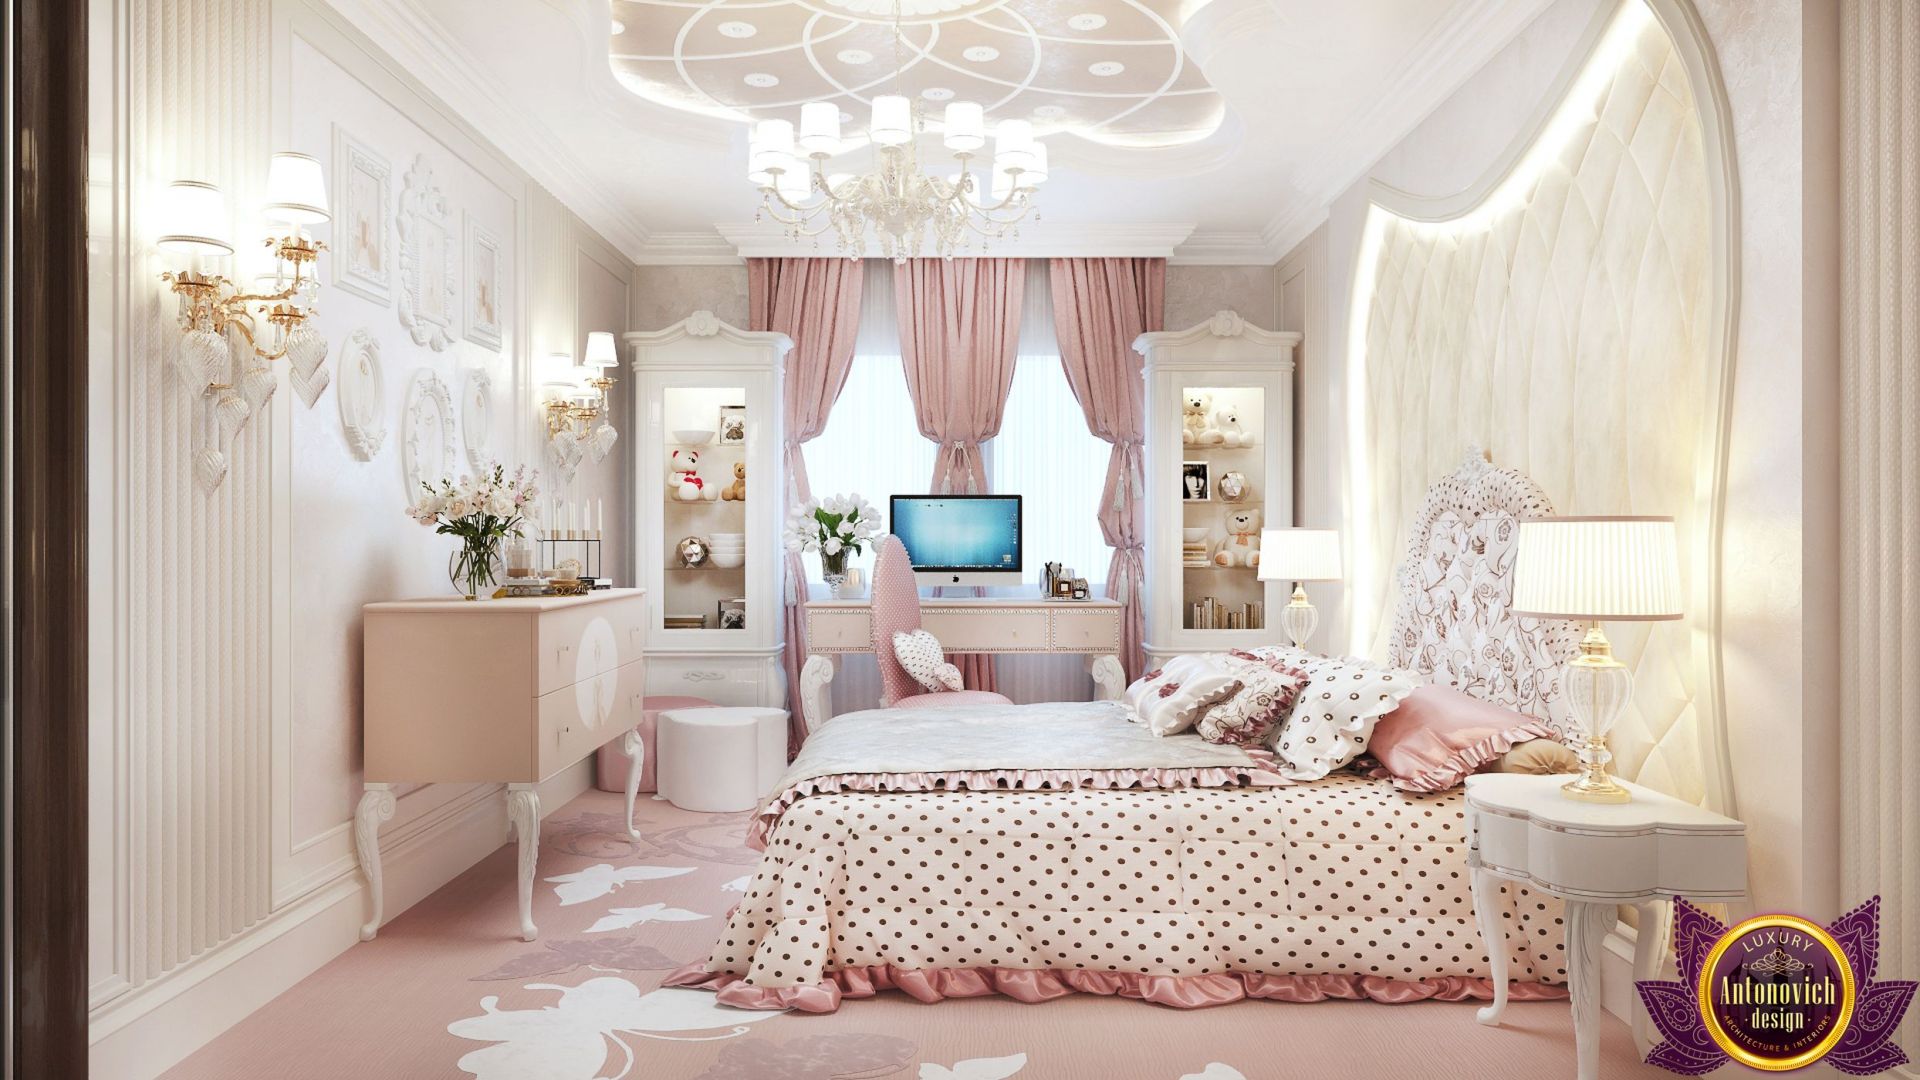 Stunning girls bedroom design with a dreamy color palette